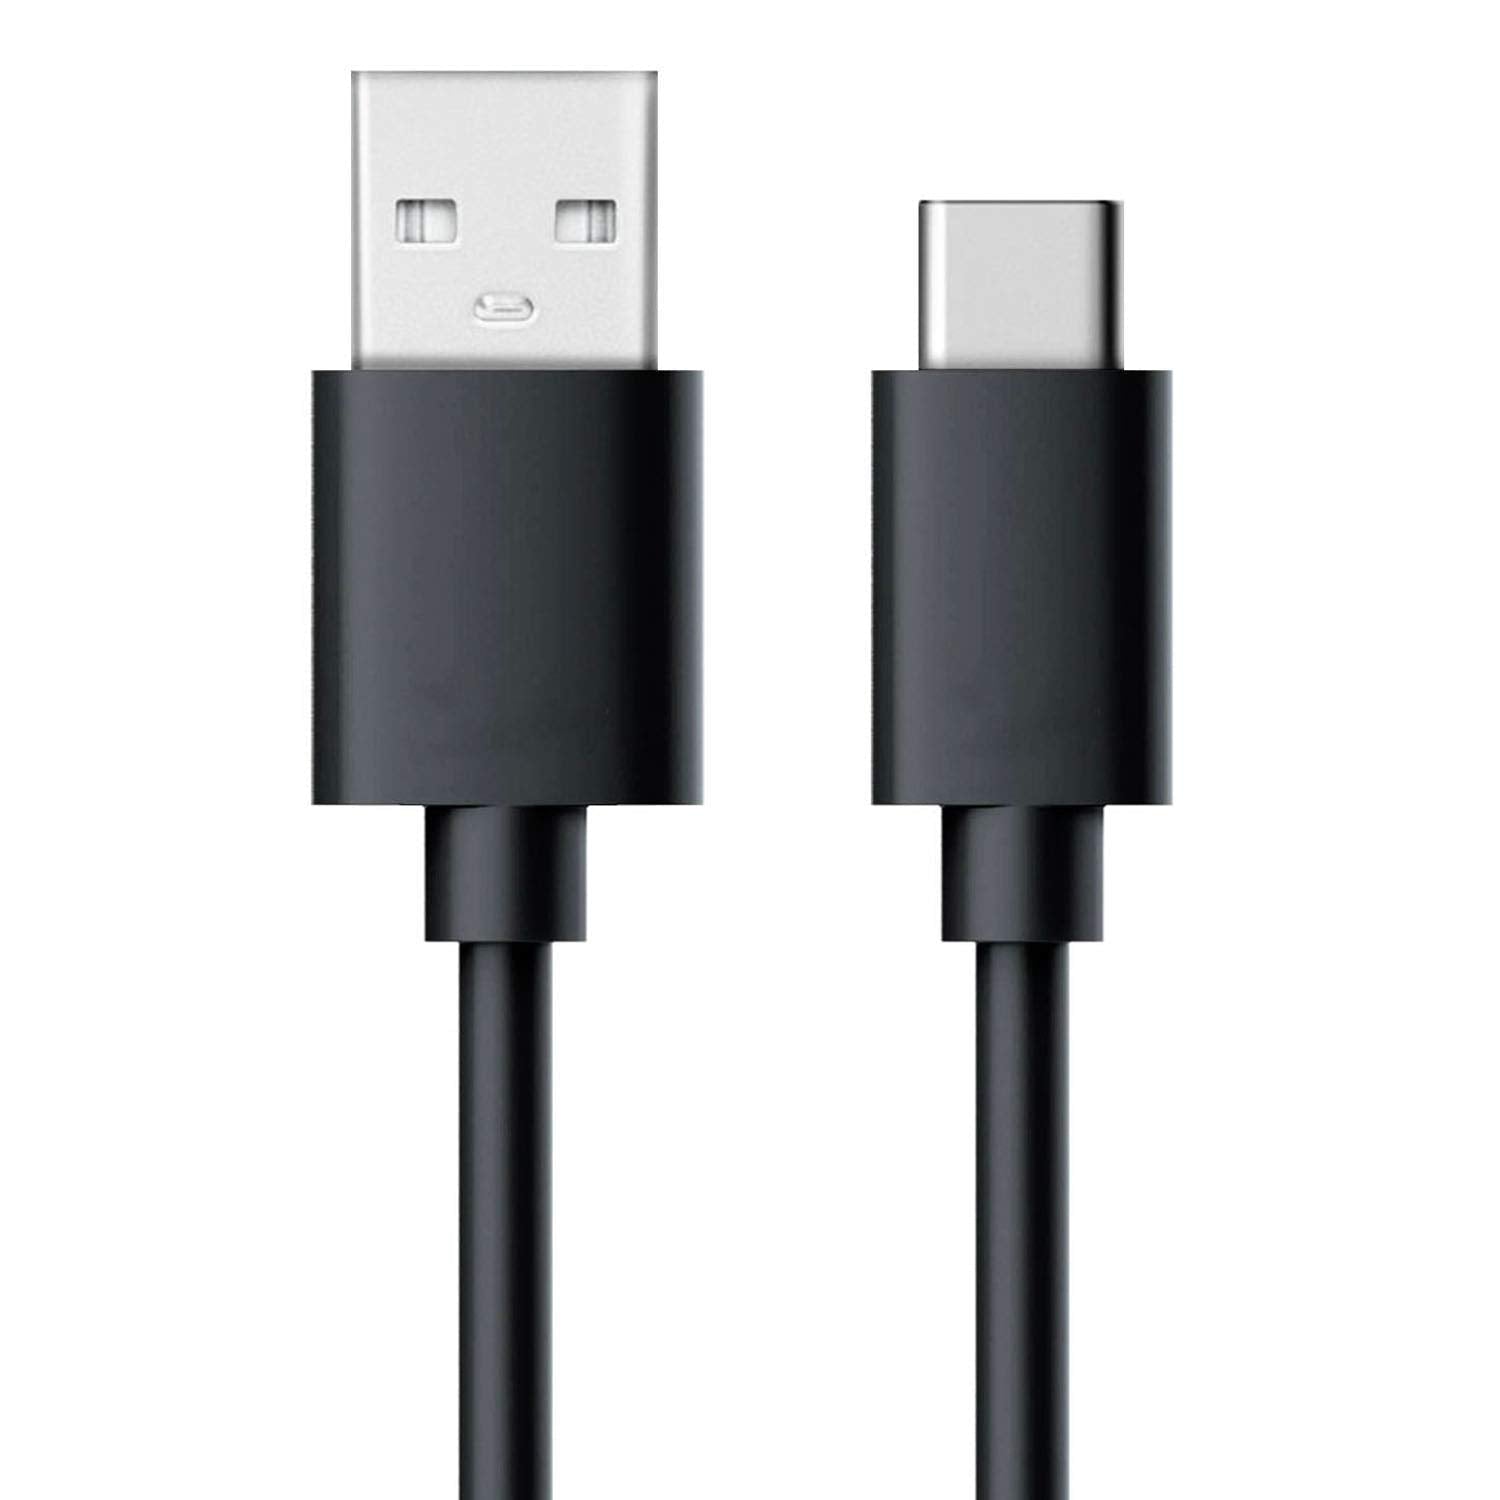 Mi Redmi A3 Fast Charging Type-C Data Cable Black -1 Meter